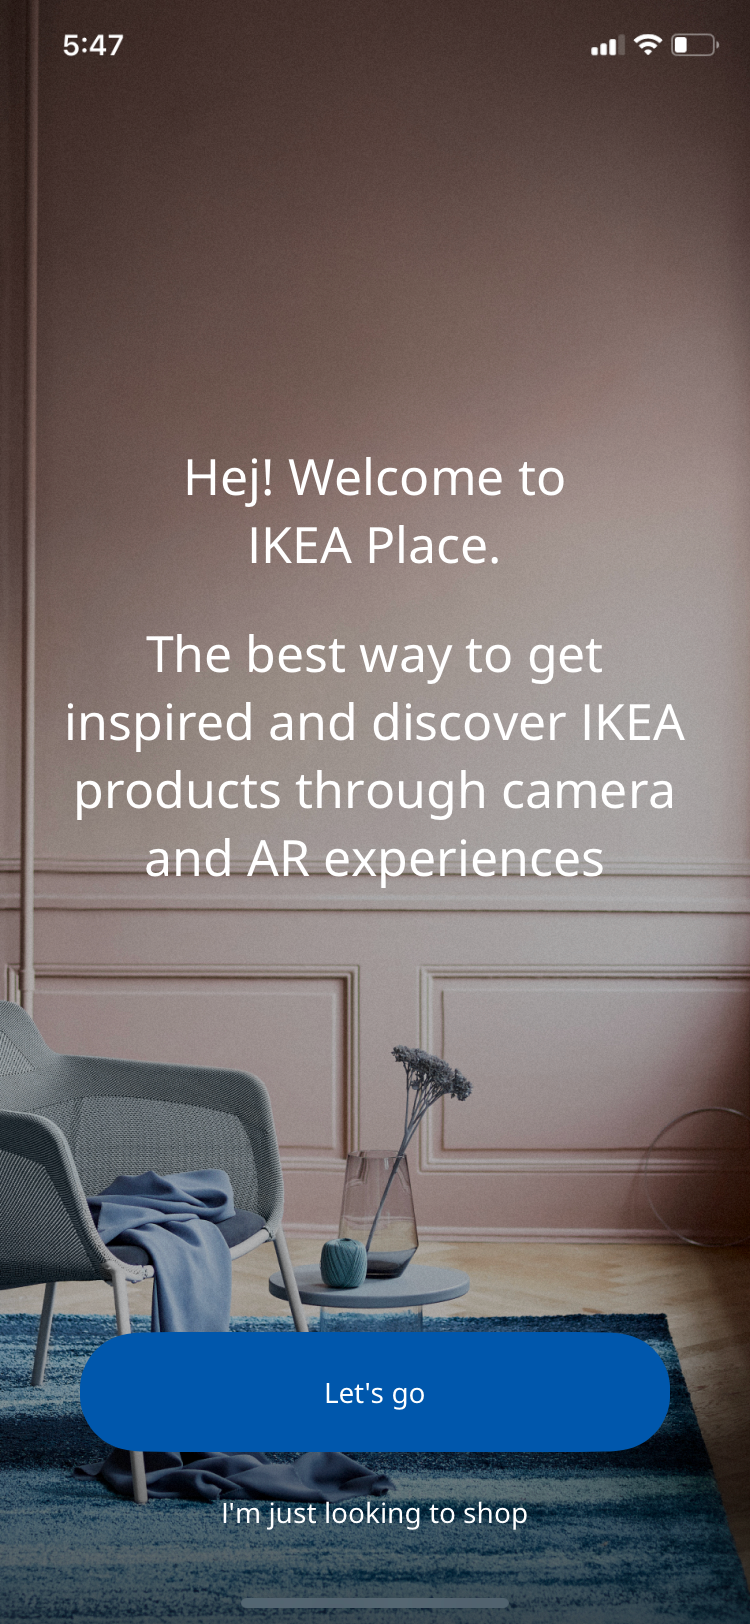 Ikea Place introduction.